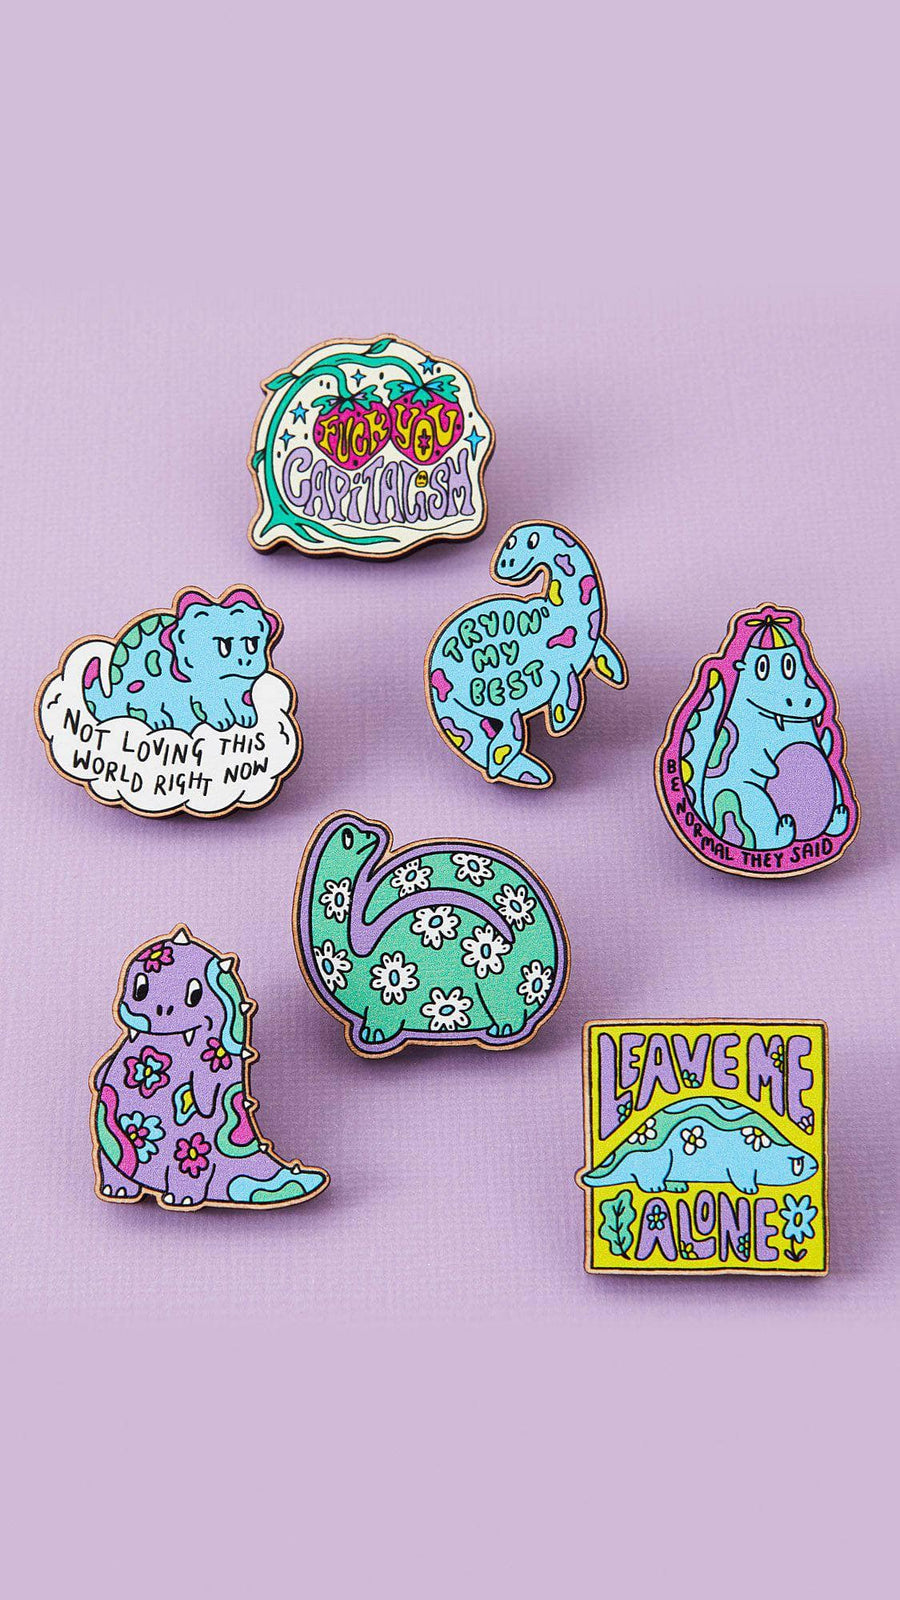 Punky Pins Leave Me Alone Dinosaur Wooden Eco Pin